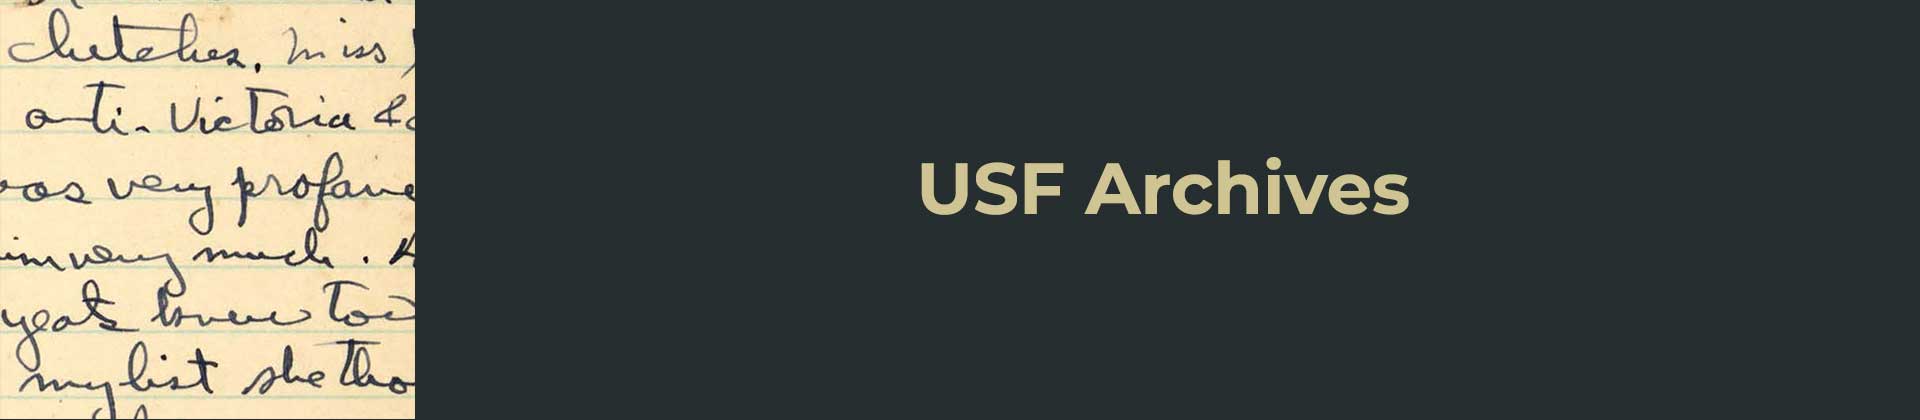 USF Archives - Other